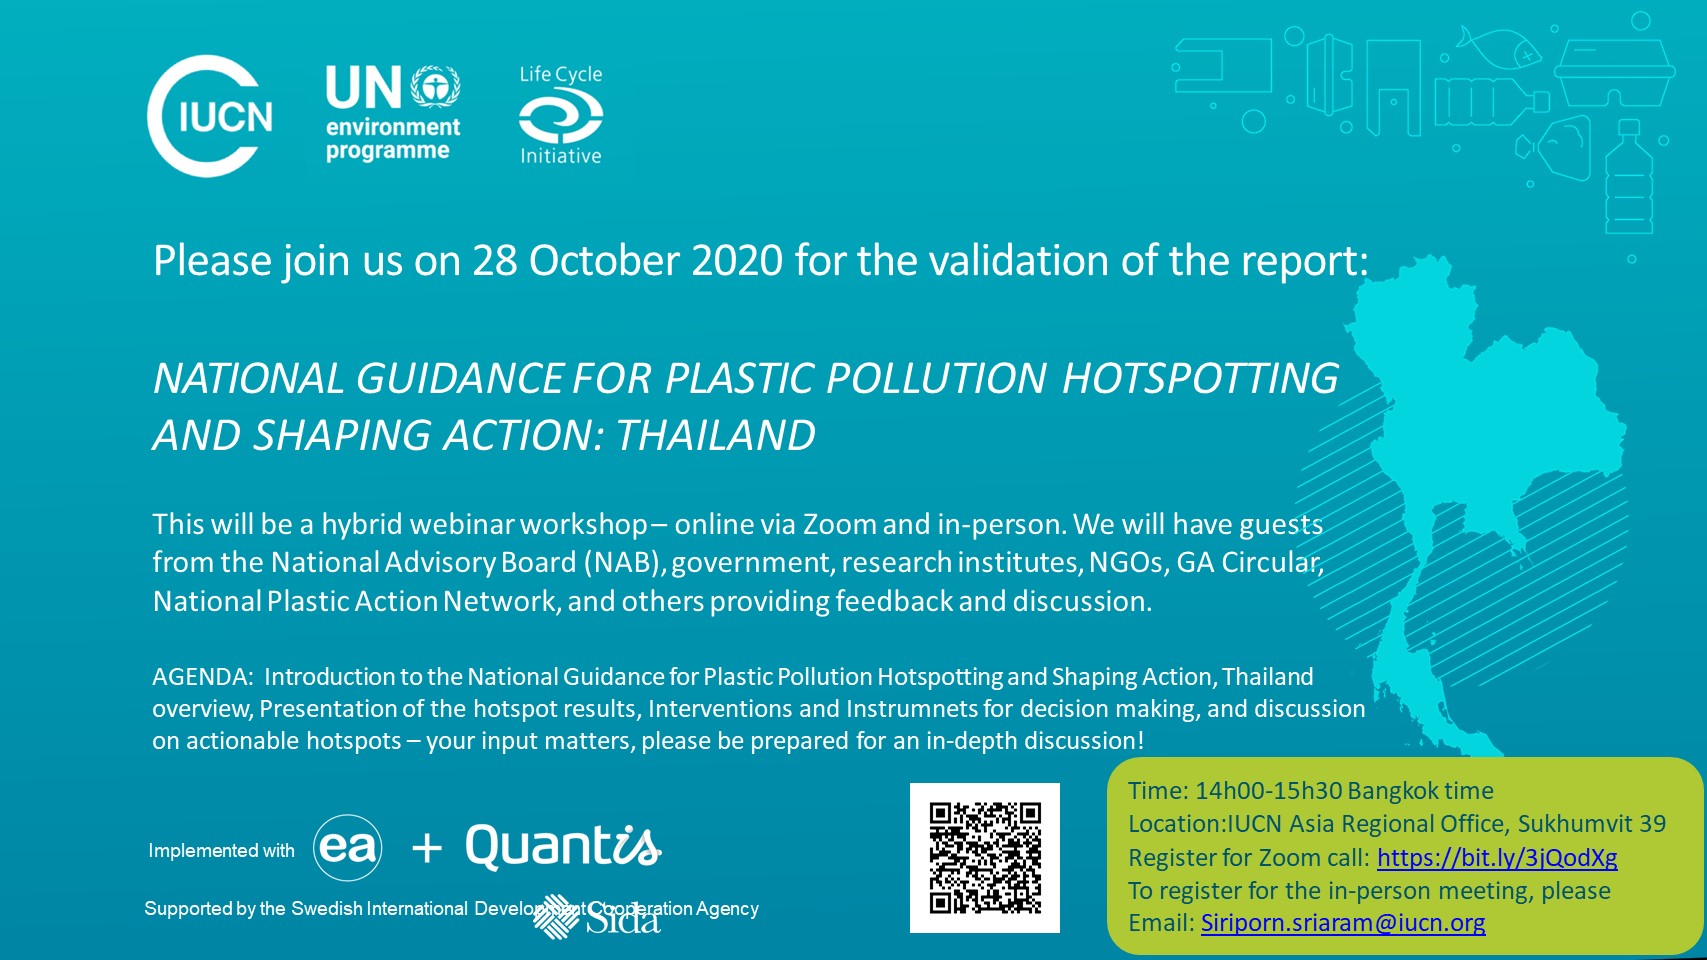 NATIONAL GUIDANCE FOR PLASTIC POLLUTION HOTSPOTTING AND SHAPING ACTION by IUCN, UNEP and Life Cycle Initiative 2020